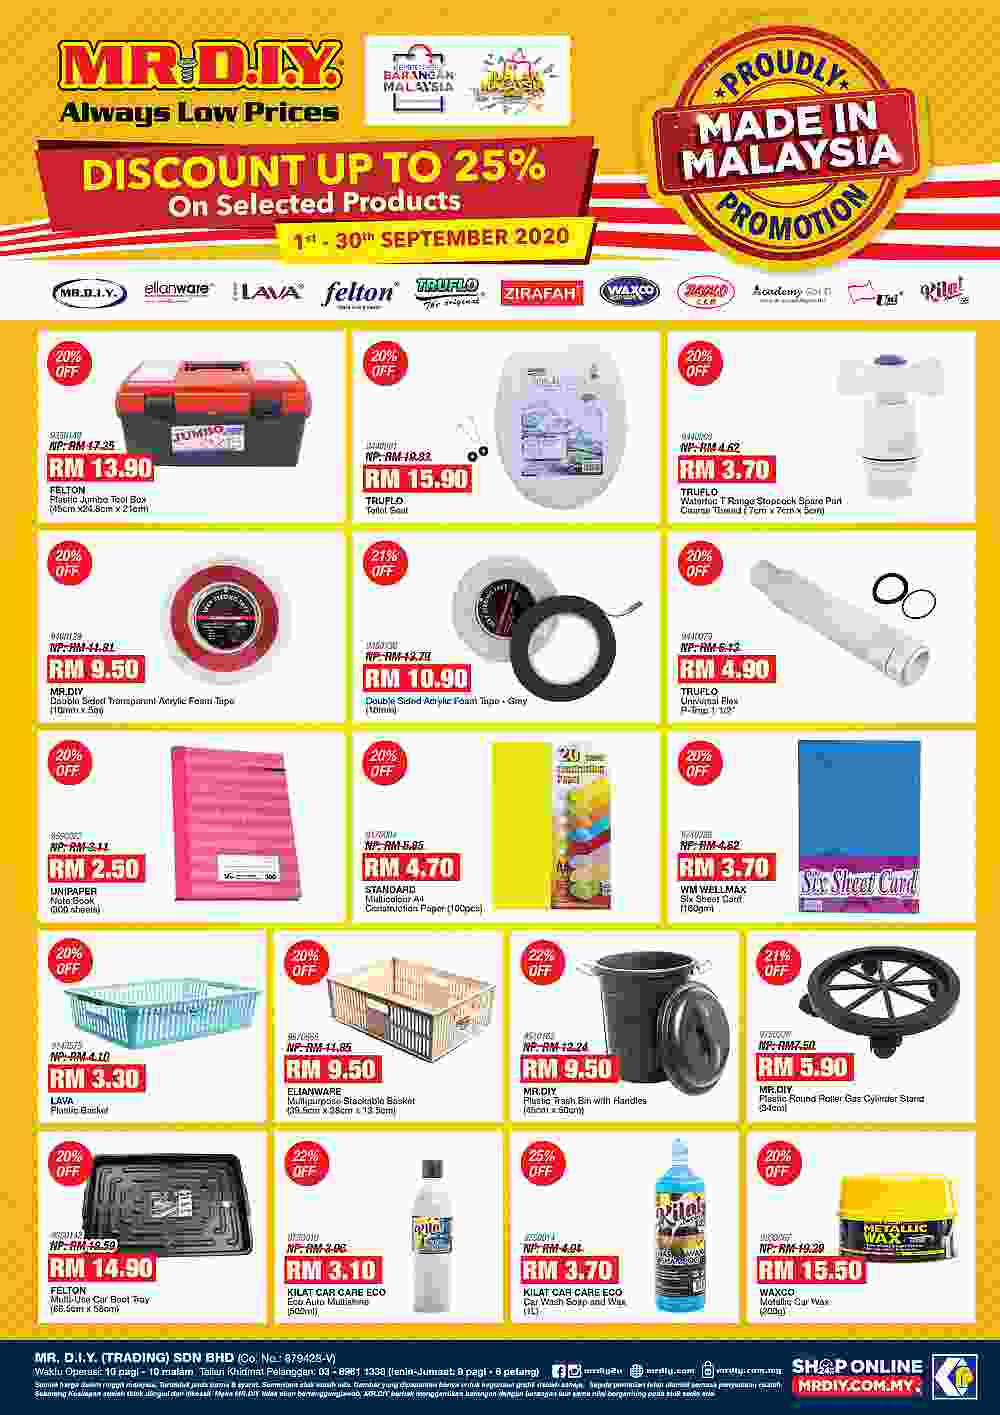 The products cover a wide range of useful household items that consumers can pick up at affordable prices. — Picture courtesy of MR.DIY